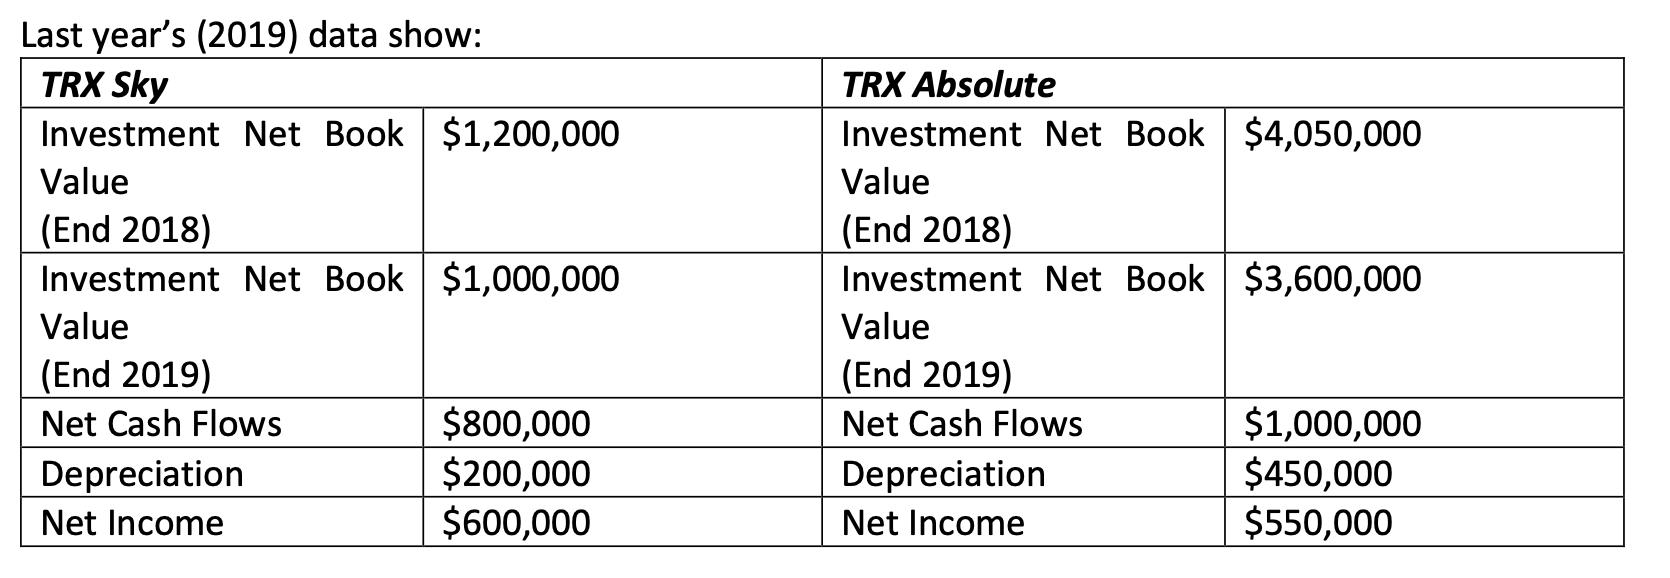 Last years (2019) data show: TRX Sky Investment Net Book $1,200,000 Value (End 2018) Investment Net Book $1,000,000 Value (E